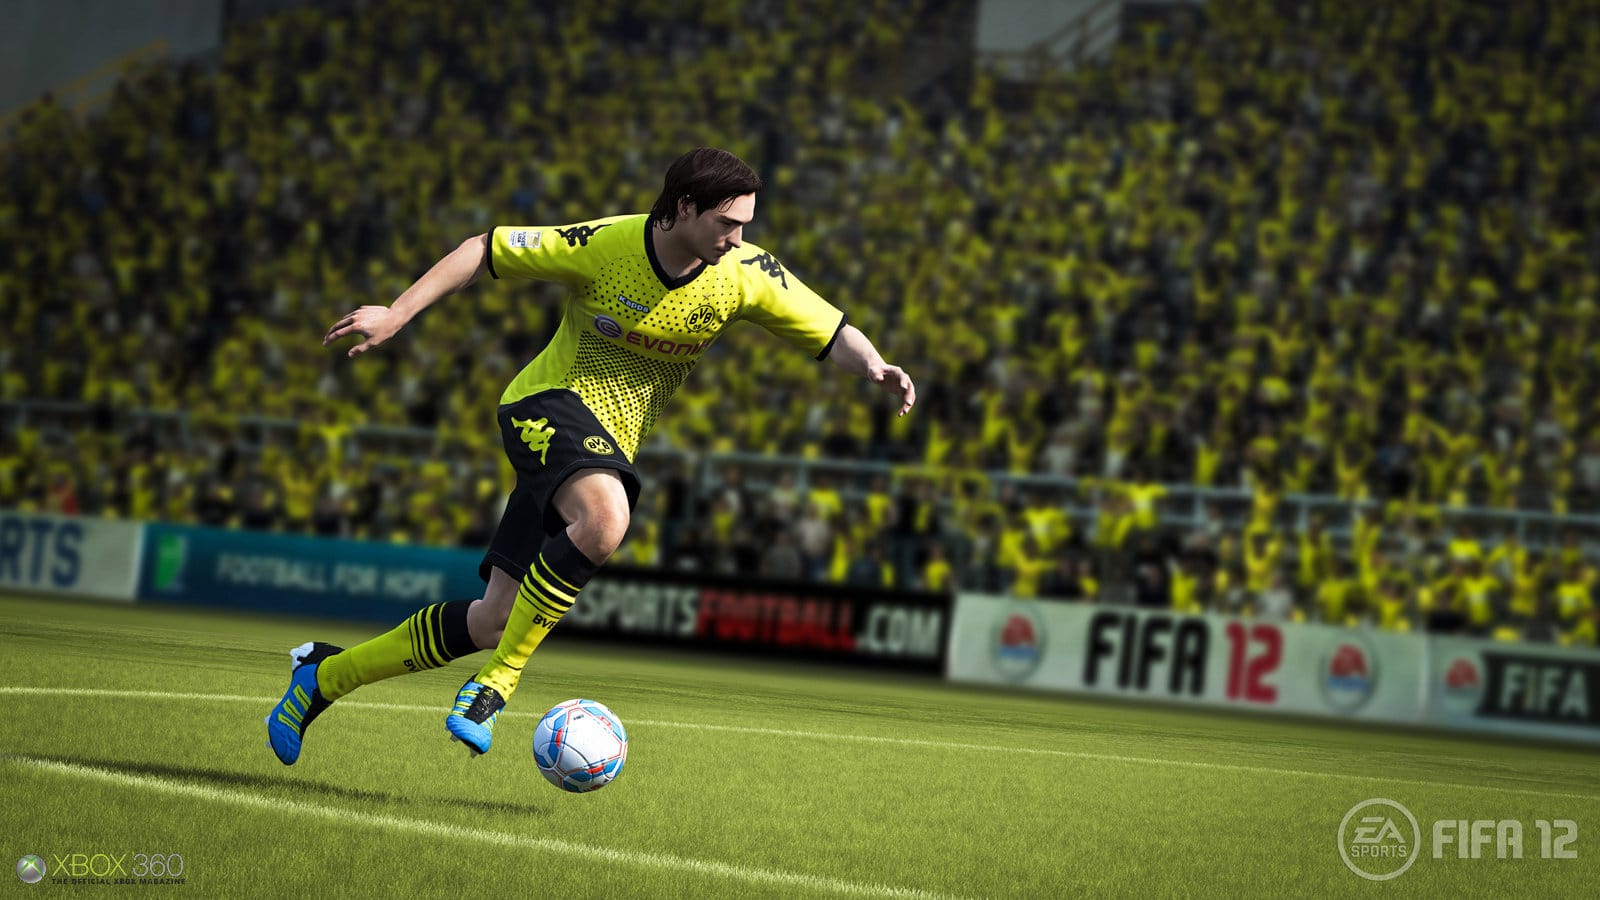 FIFA 12 Preview1600 x 900